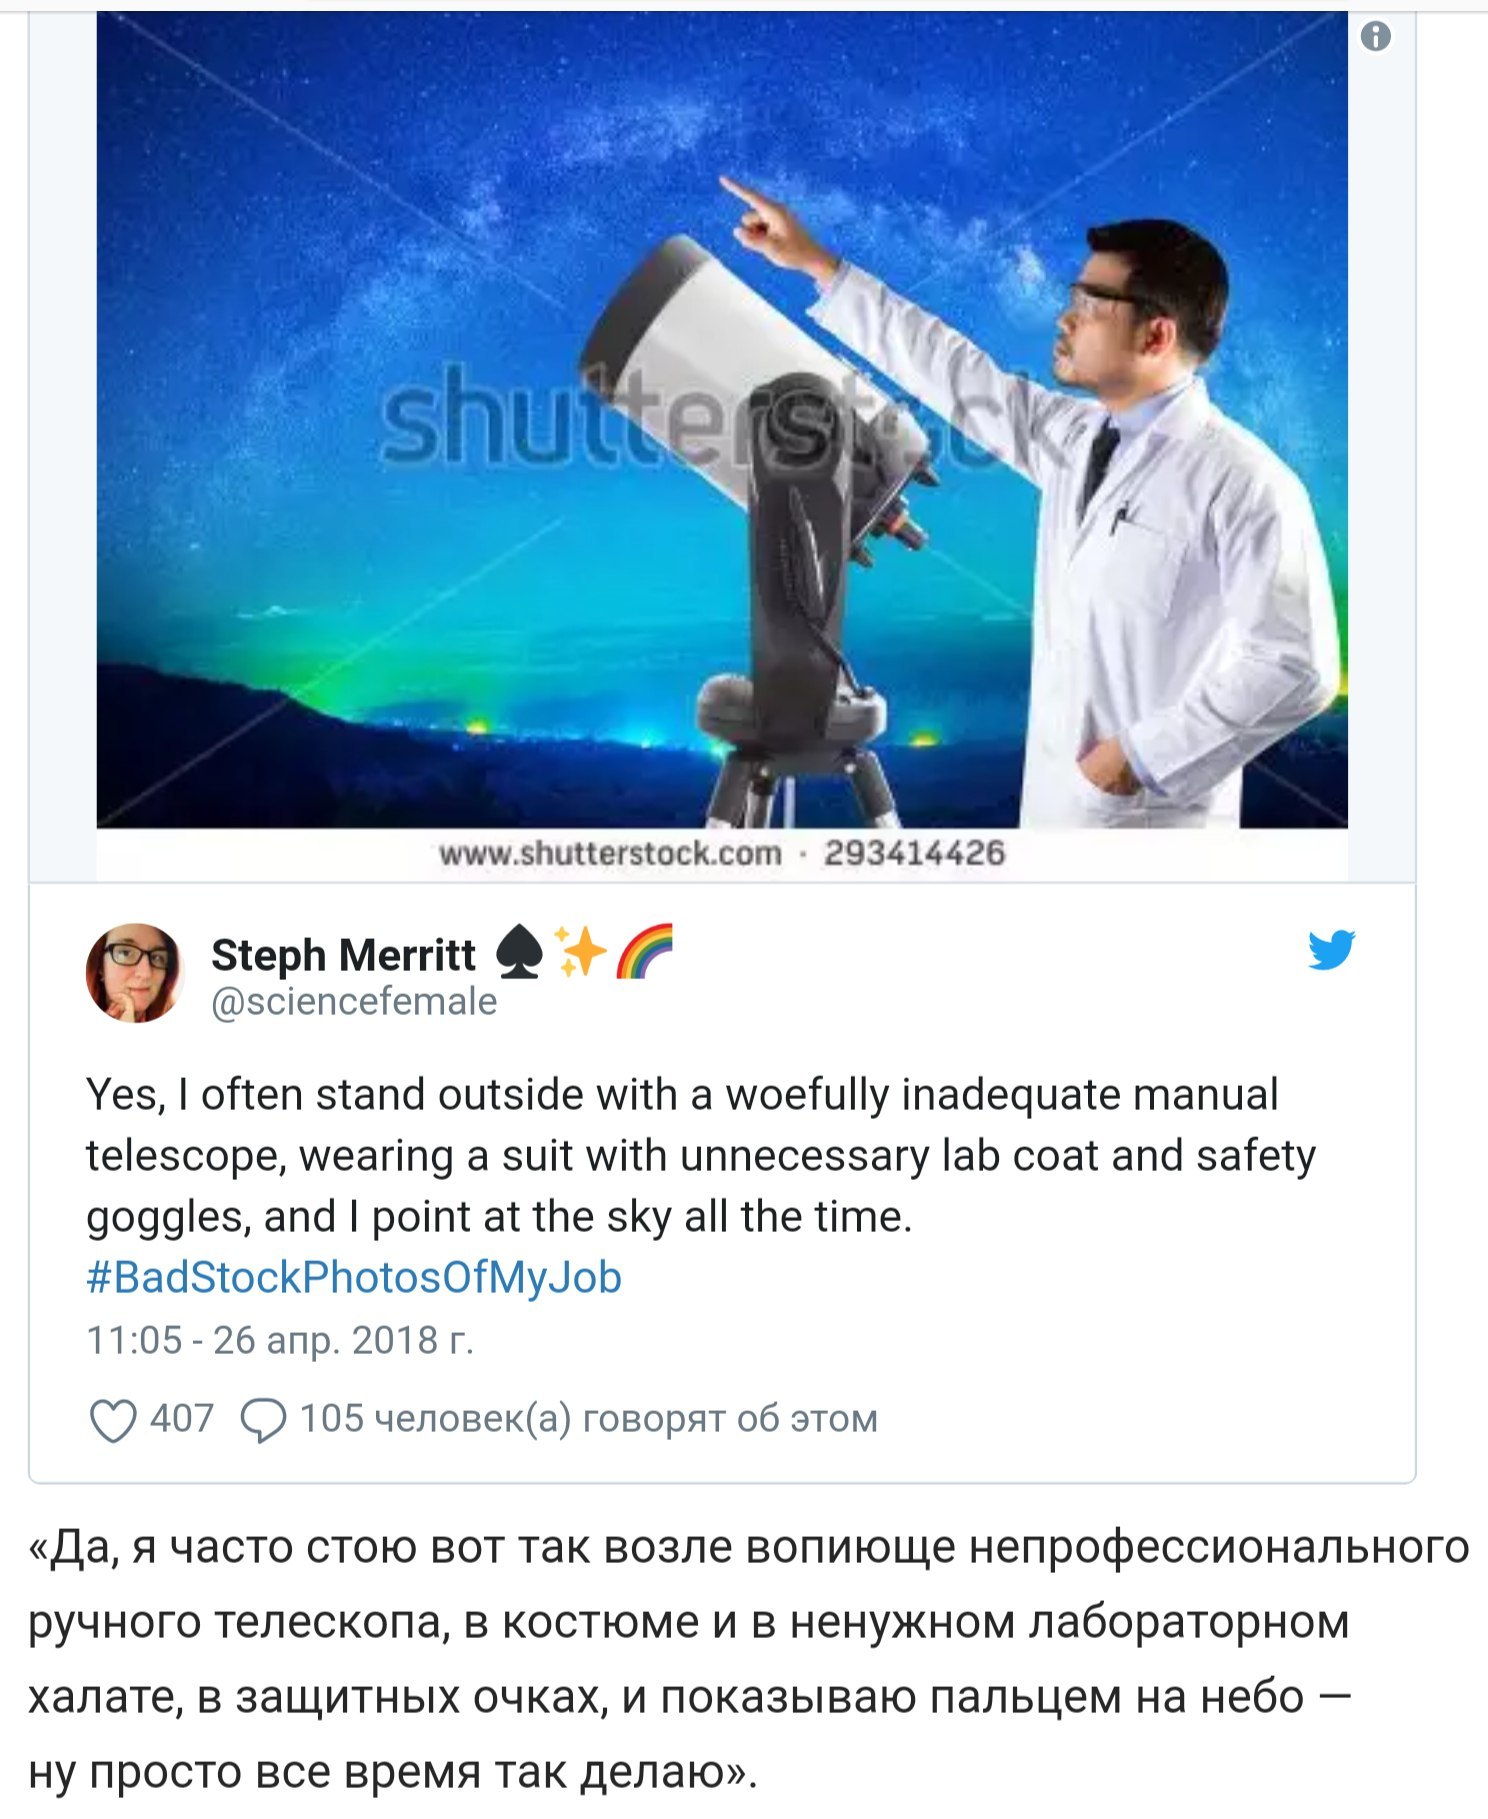 Scientists laugh at stock photos of scientists. - Humor, Screenshot, Twitter, Scientists, The photo, Longpost